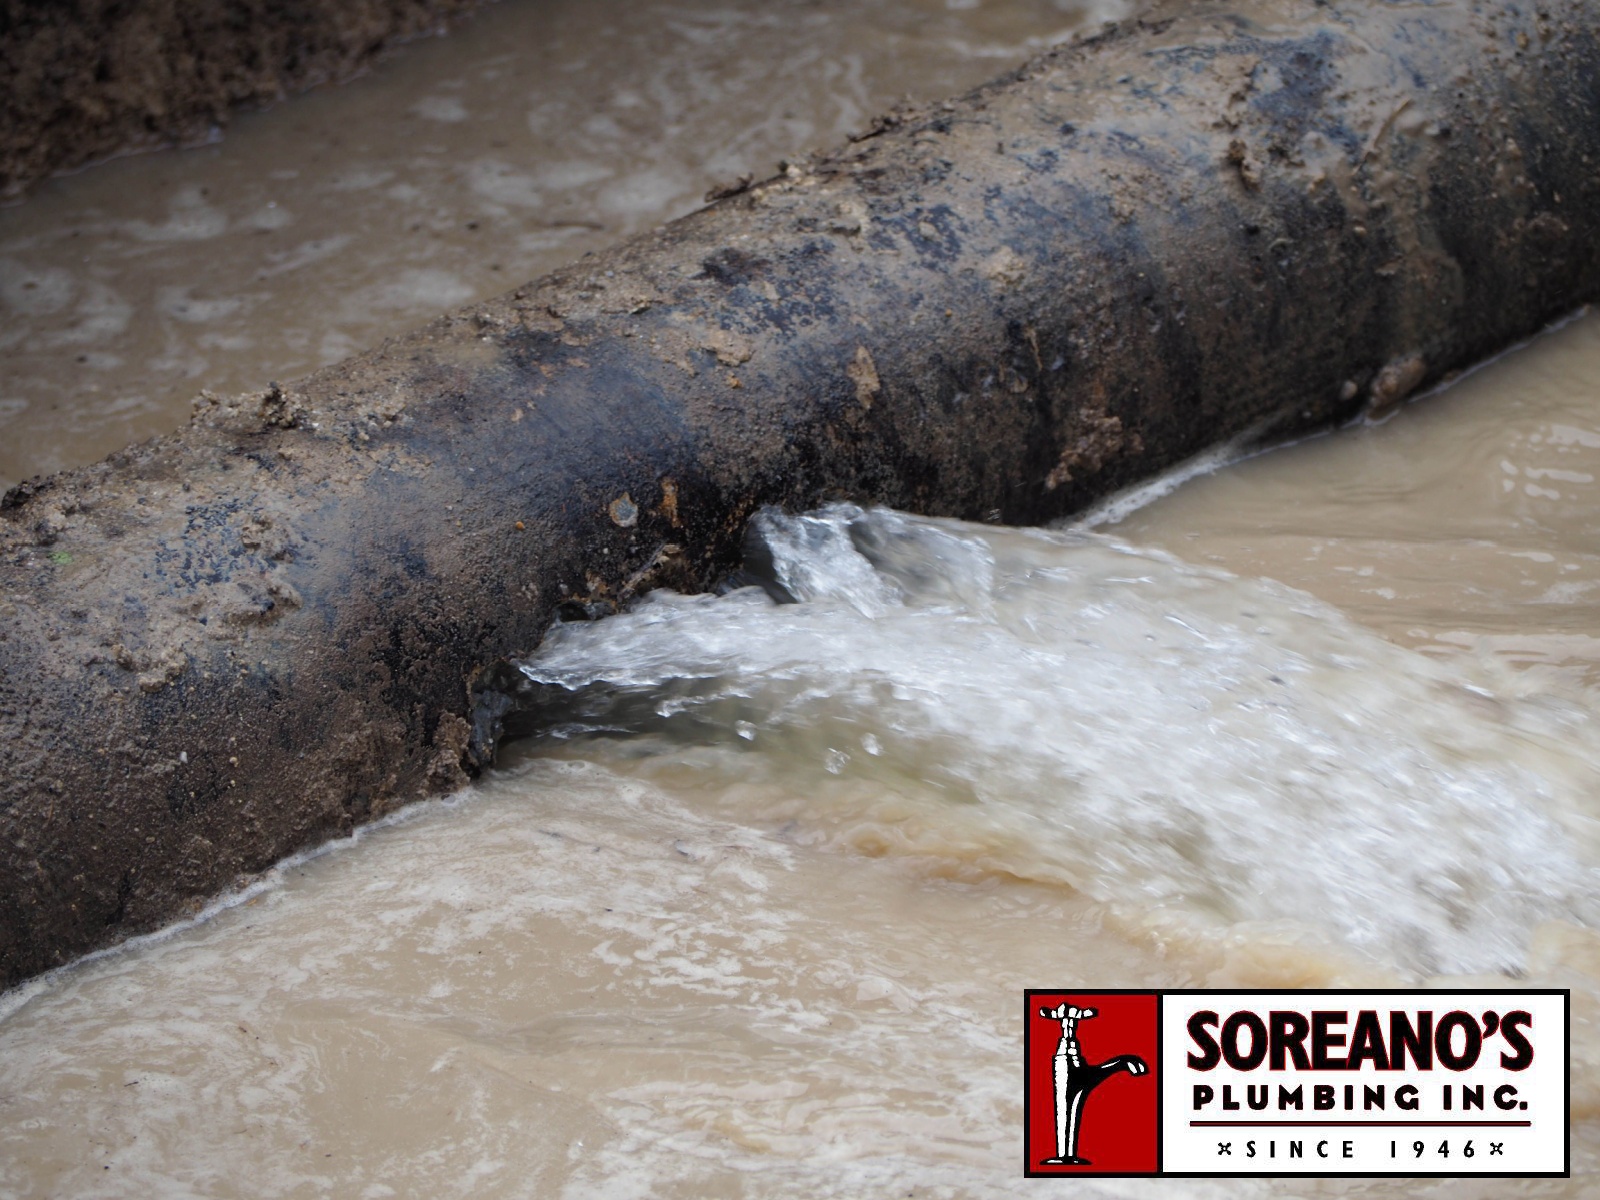 Recognize When You Need Expert Water Main Line Repair